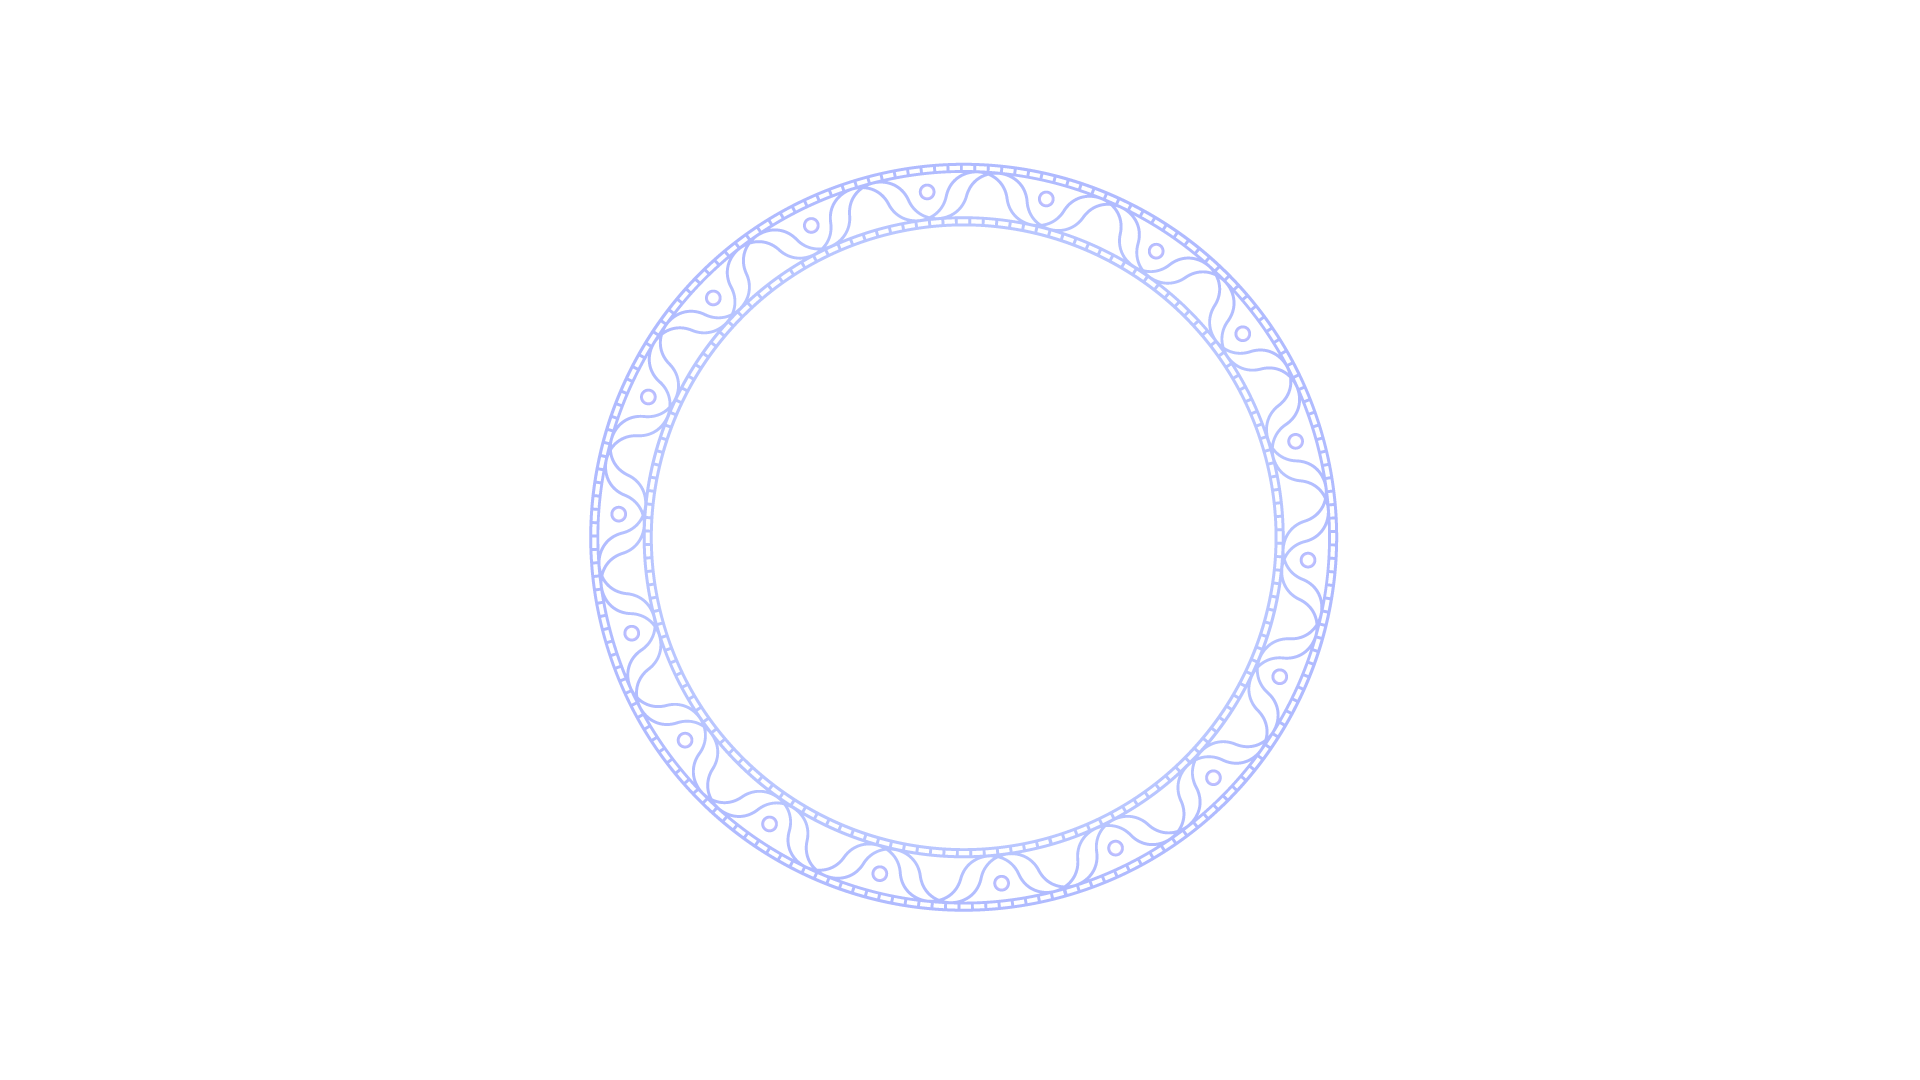 slowly rotating middle ring with Celtic scroll design